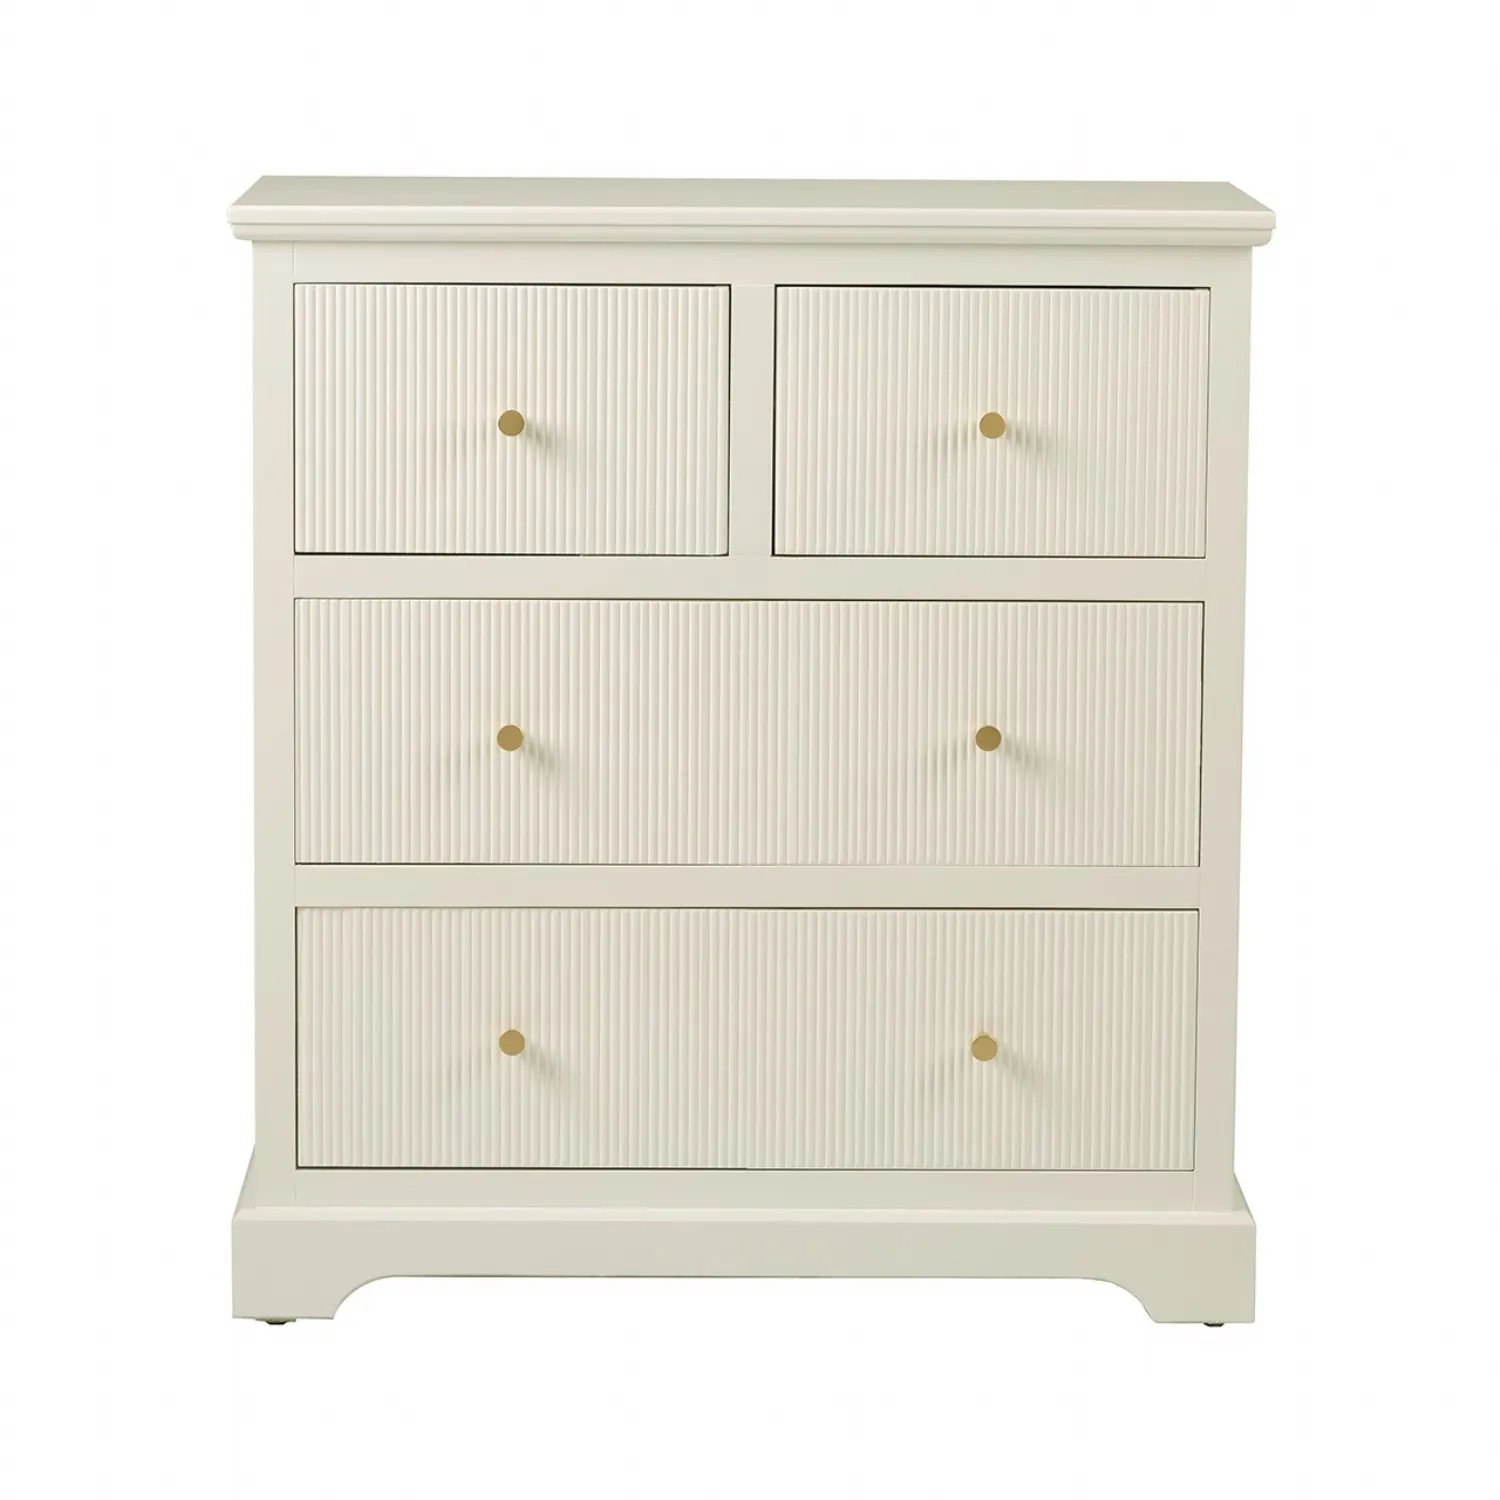 Lindon 4 Drawer Chest Cabinet White With Gold Handles